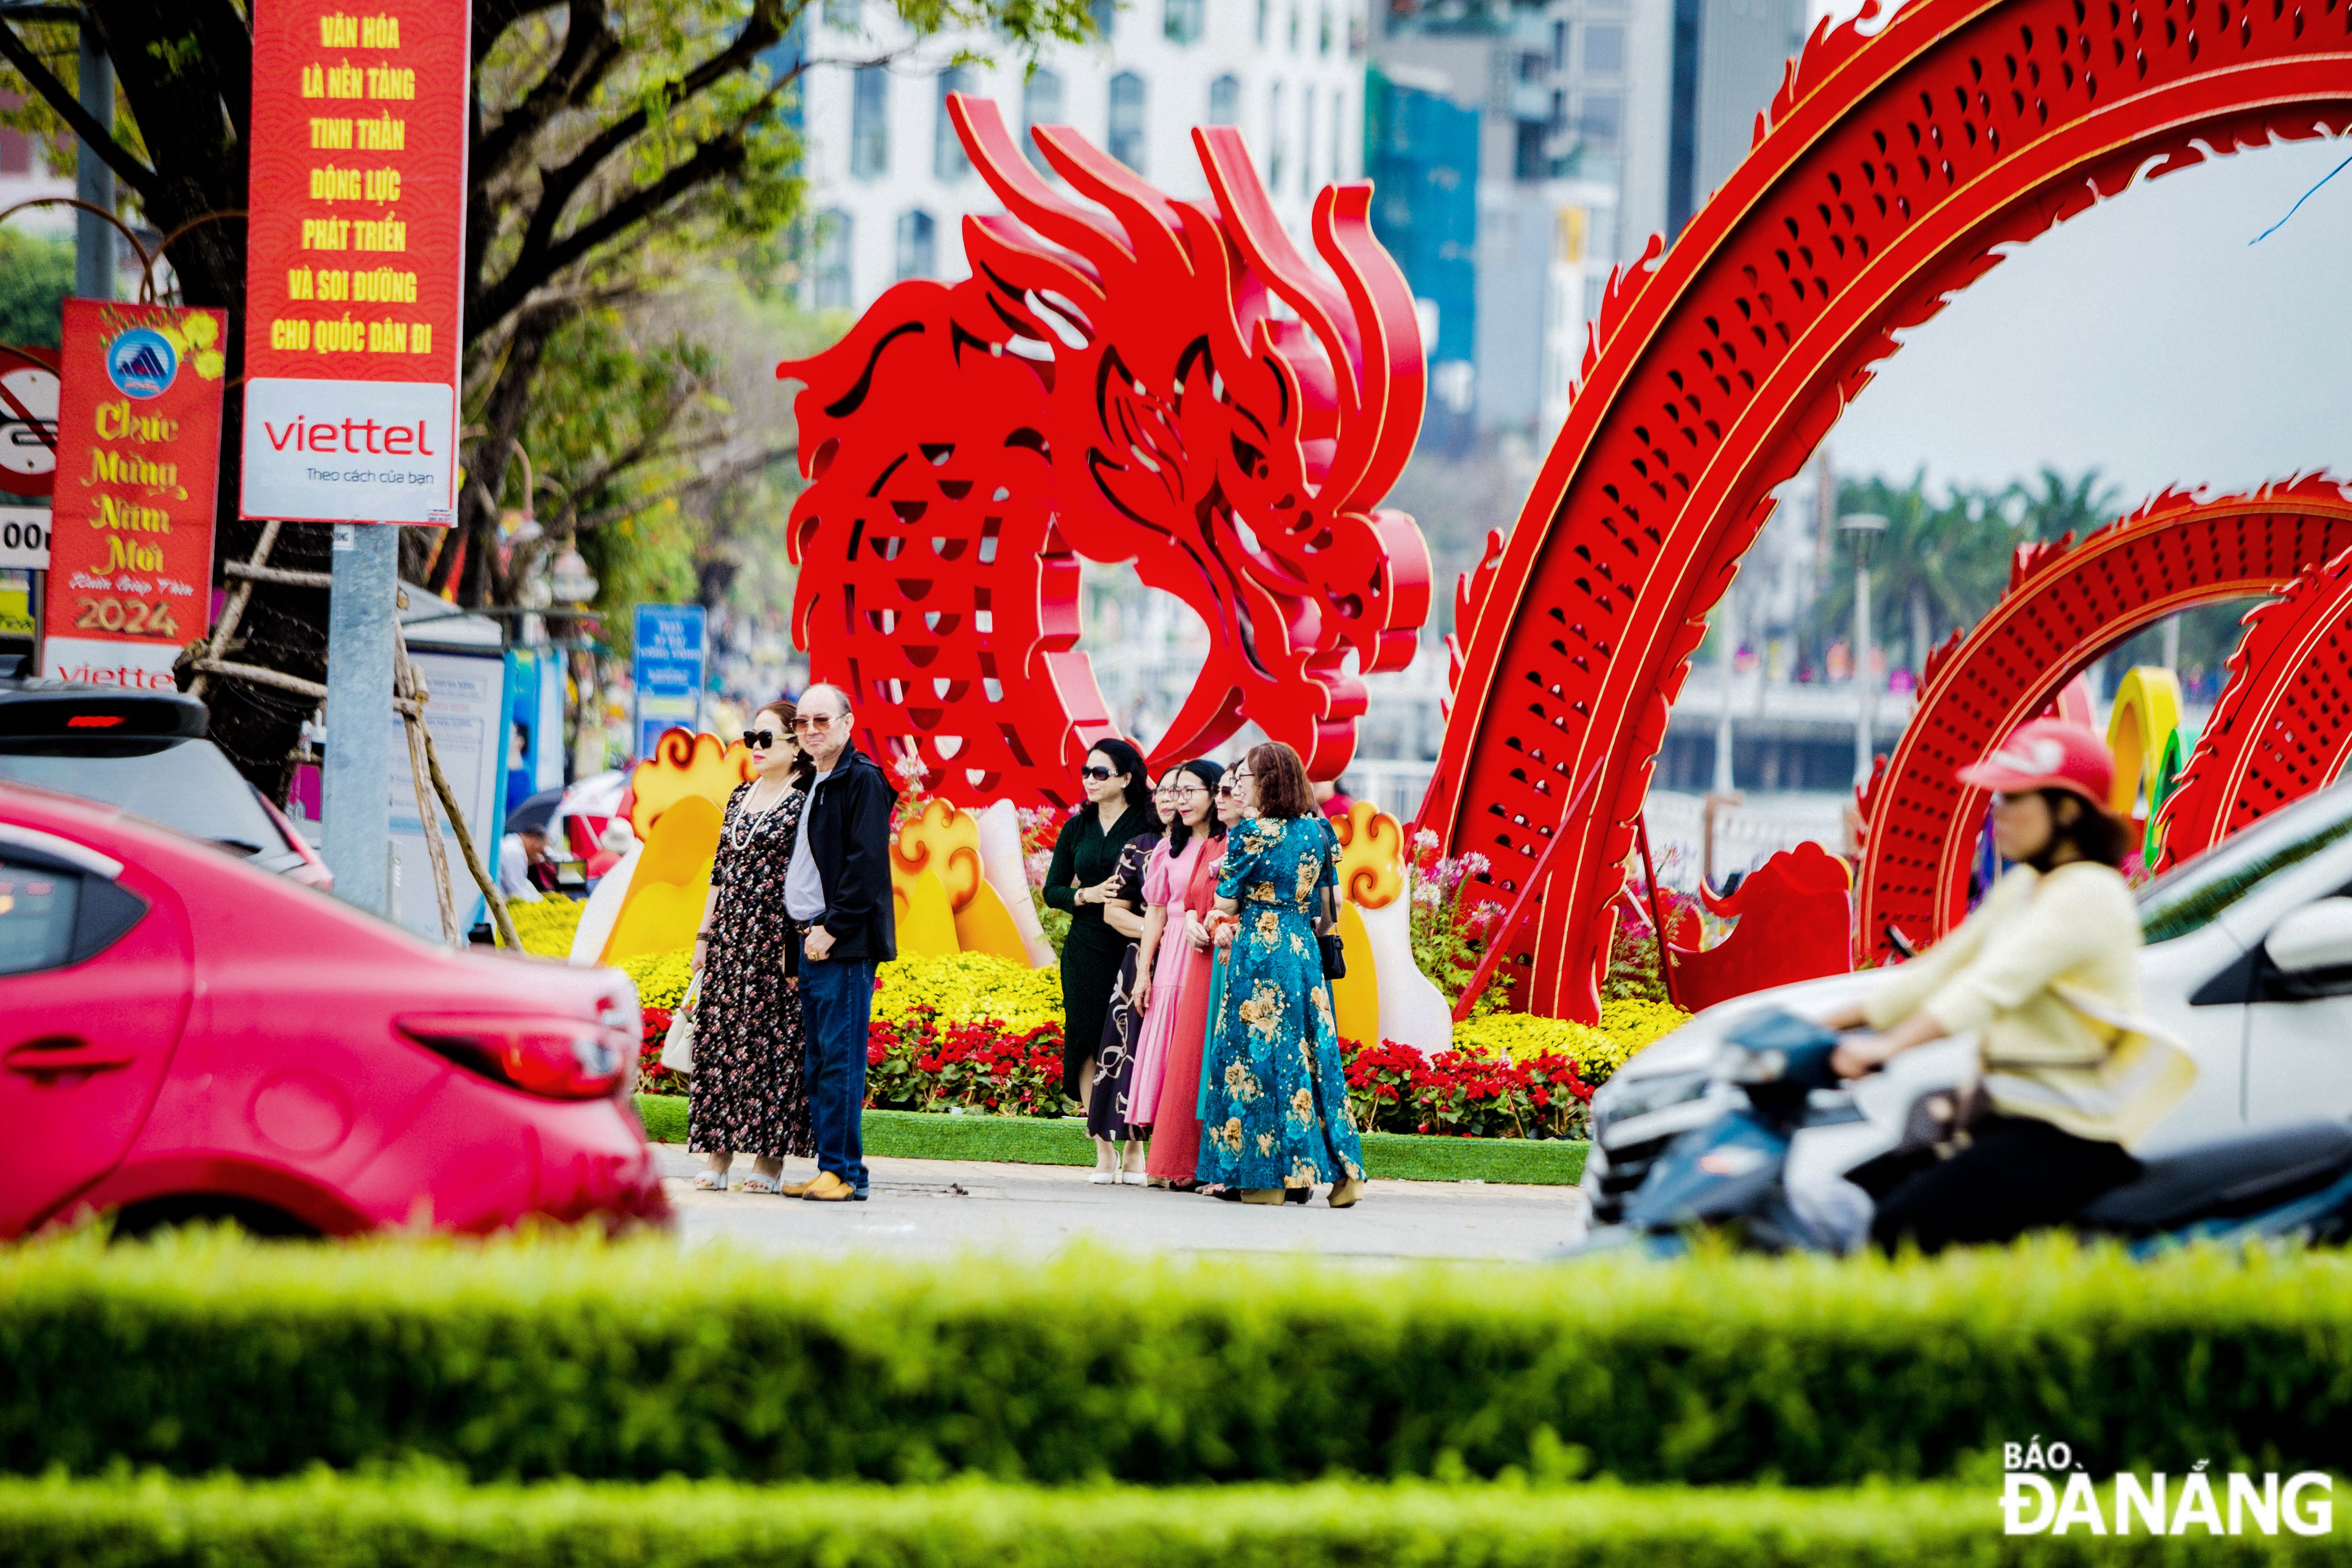 Taking advantage of nice weather, people take check-in photos at flower streets on the 6th day of Tet